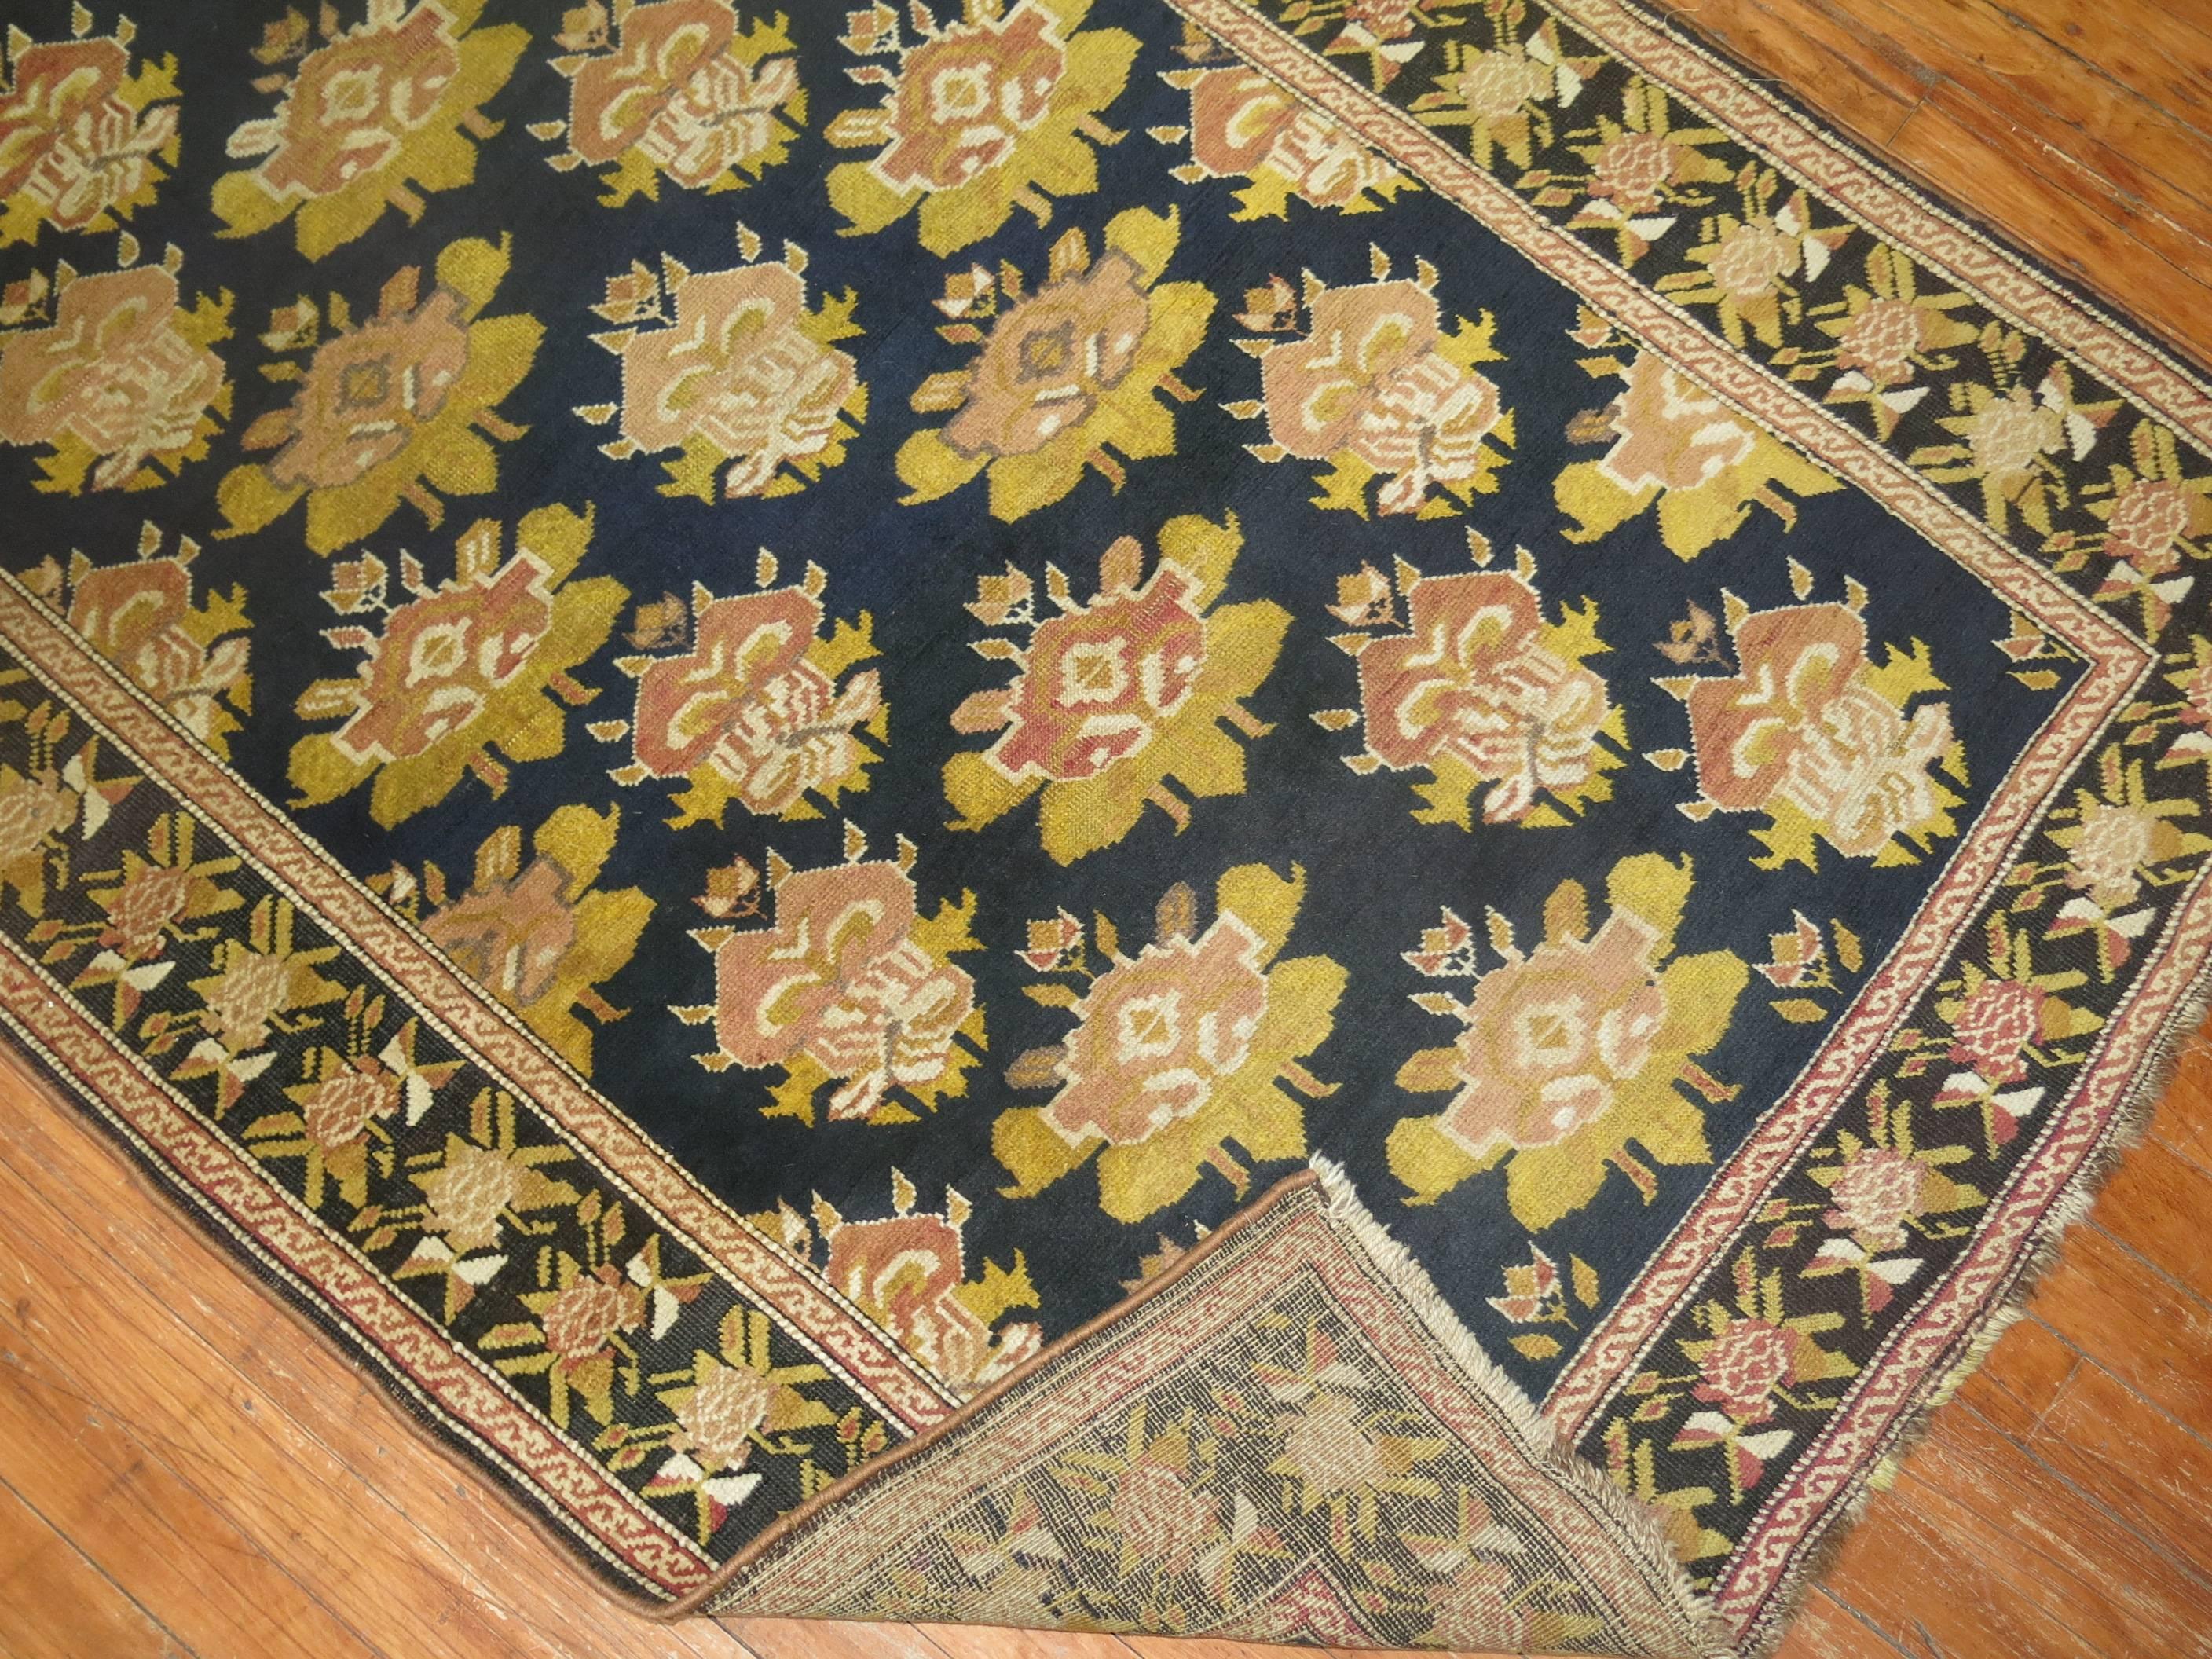 A very long early 20th century Russian Karabagh runner featuring accents in black, blue, gold and rust.
The border is black, the field is a deep navy blue. The quality is very fine.

Measures: 3'5